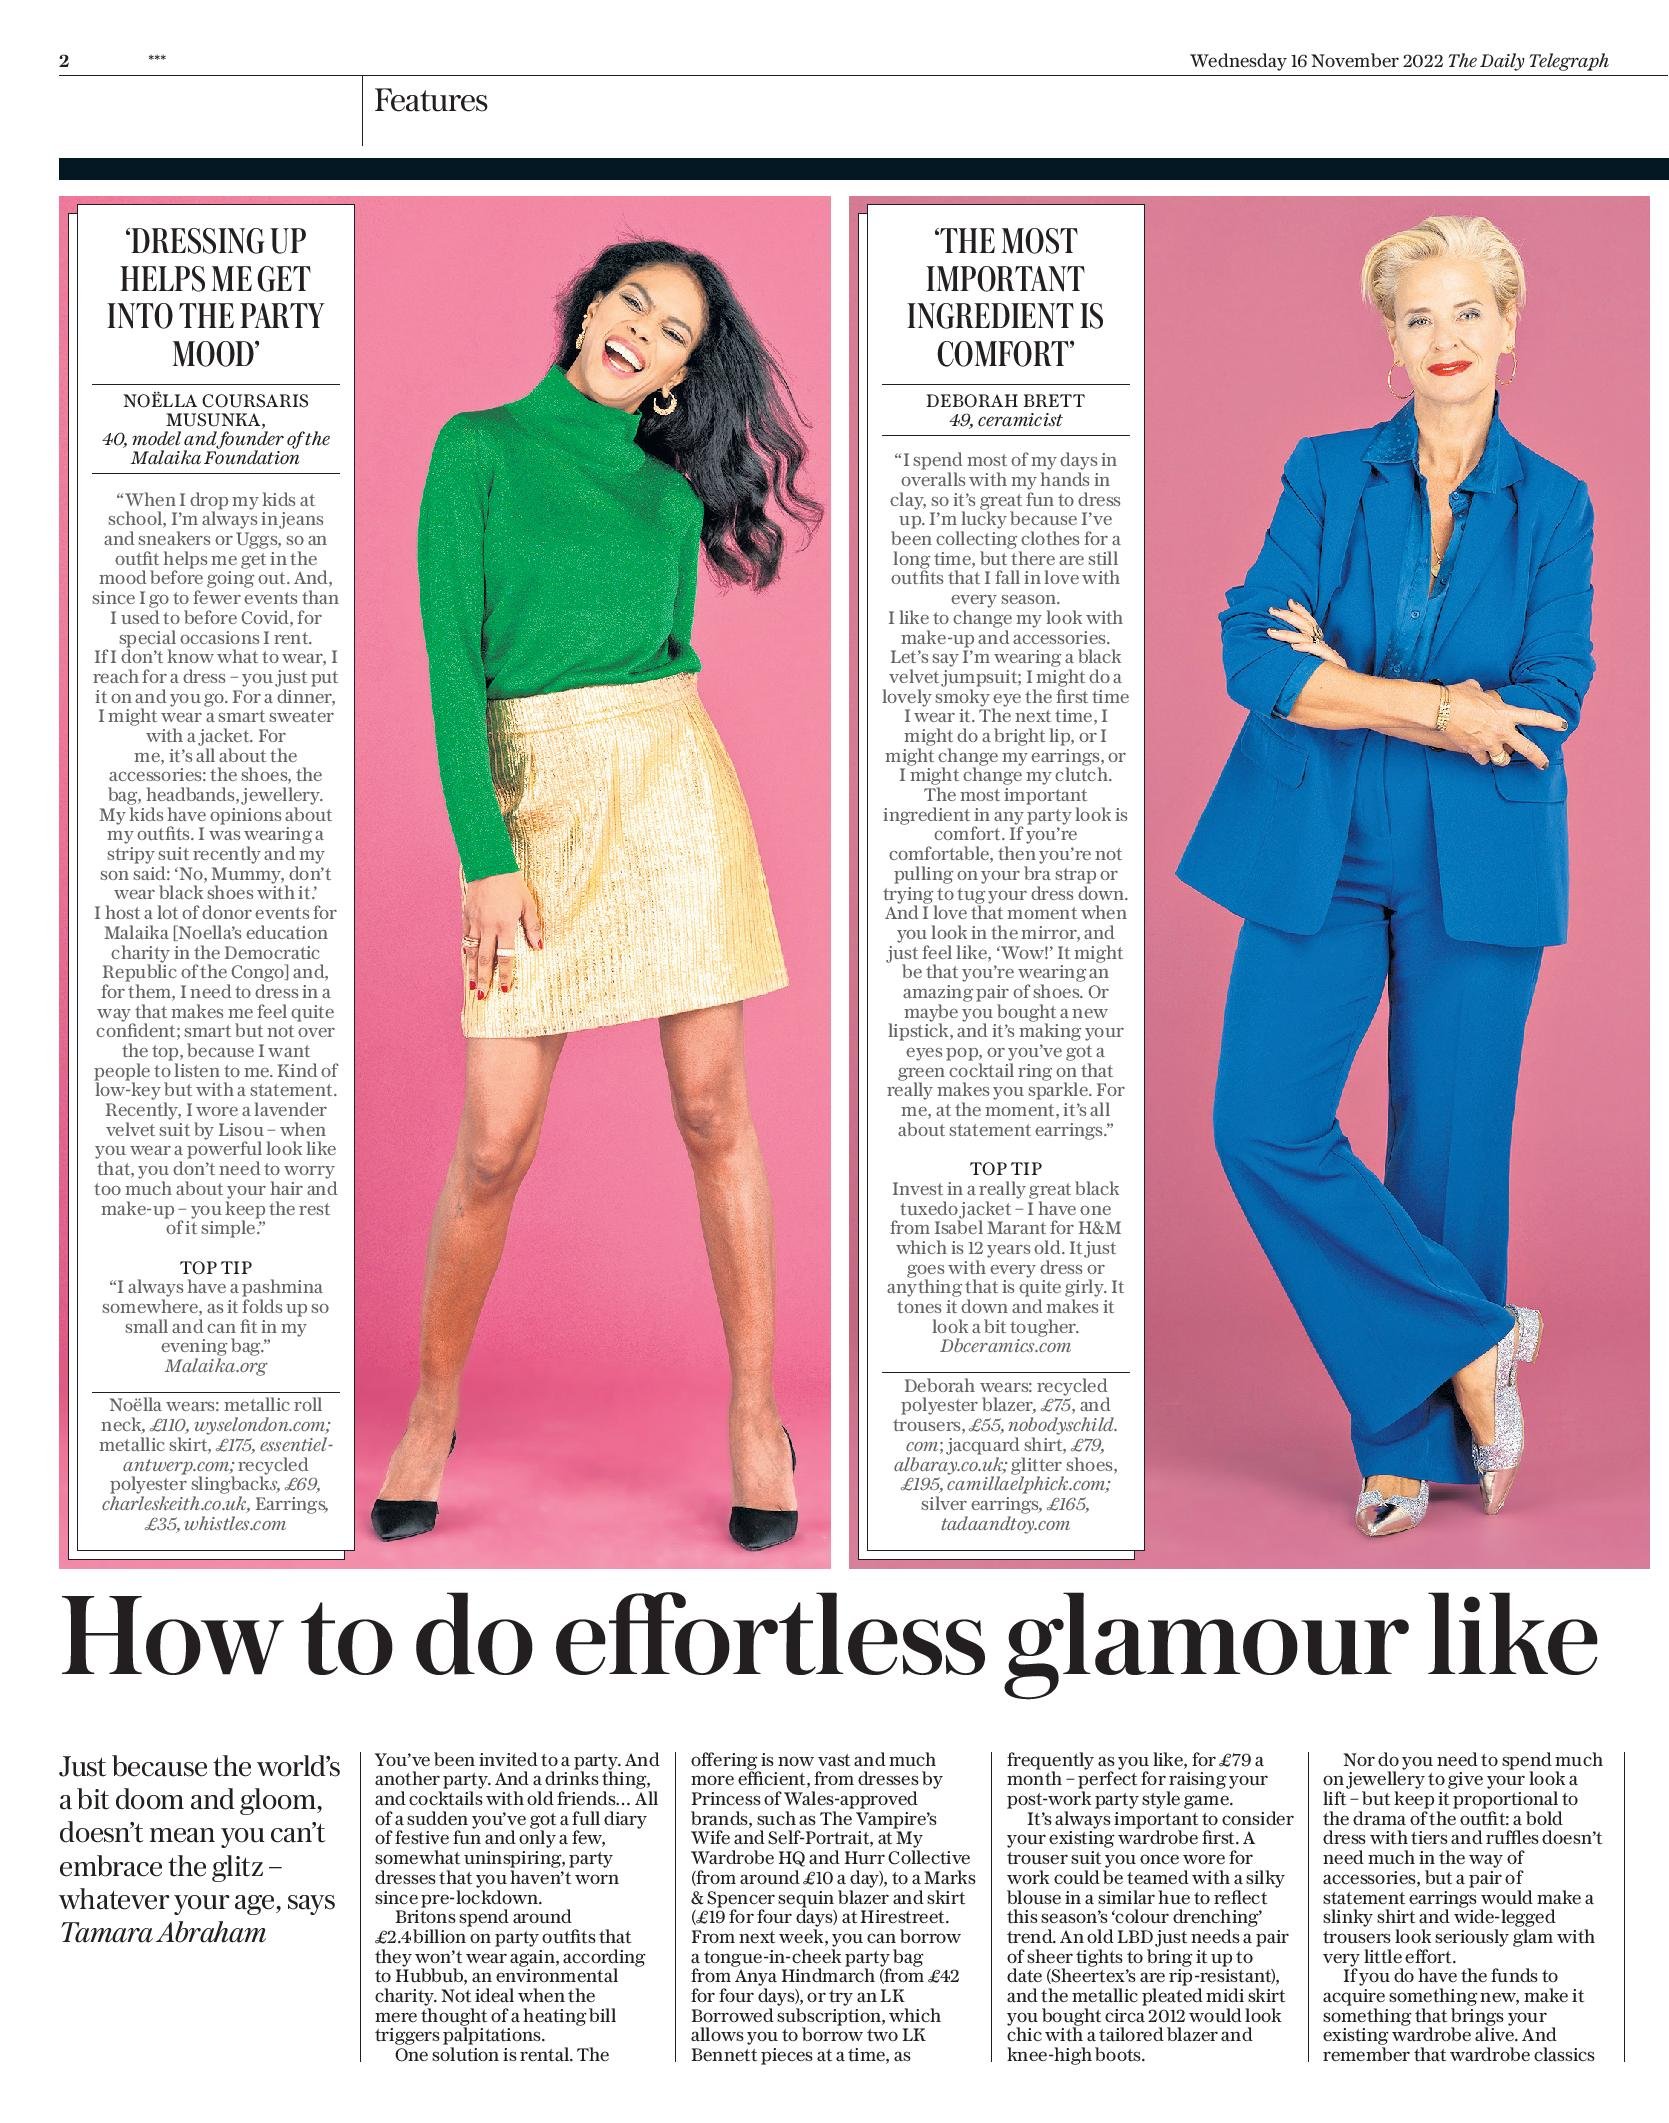 Daily Telegraph_16-11-2022_Features_1st_p2-page-001.jpg